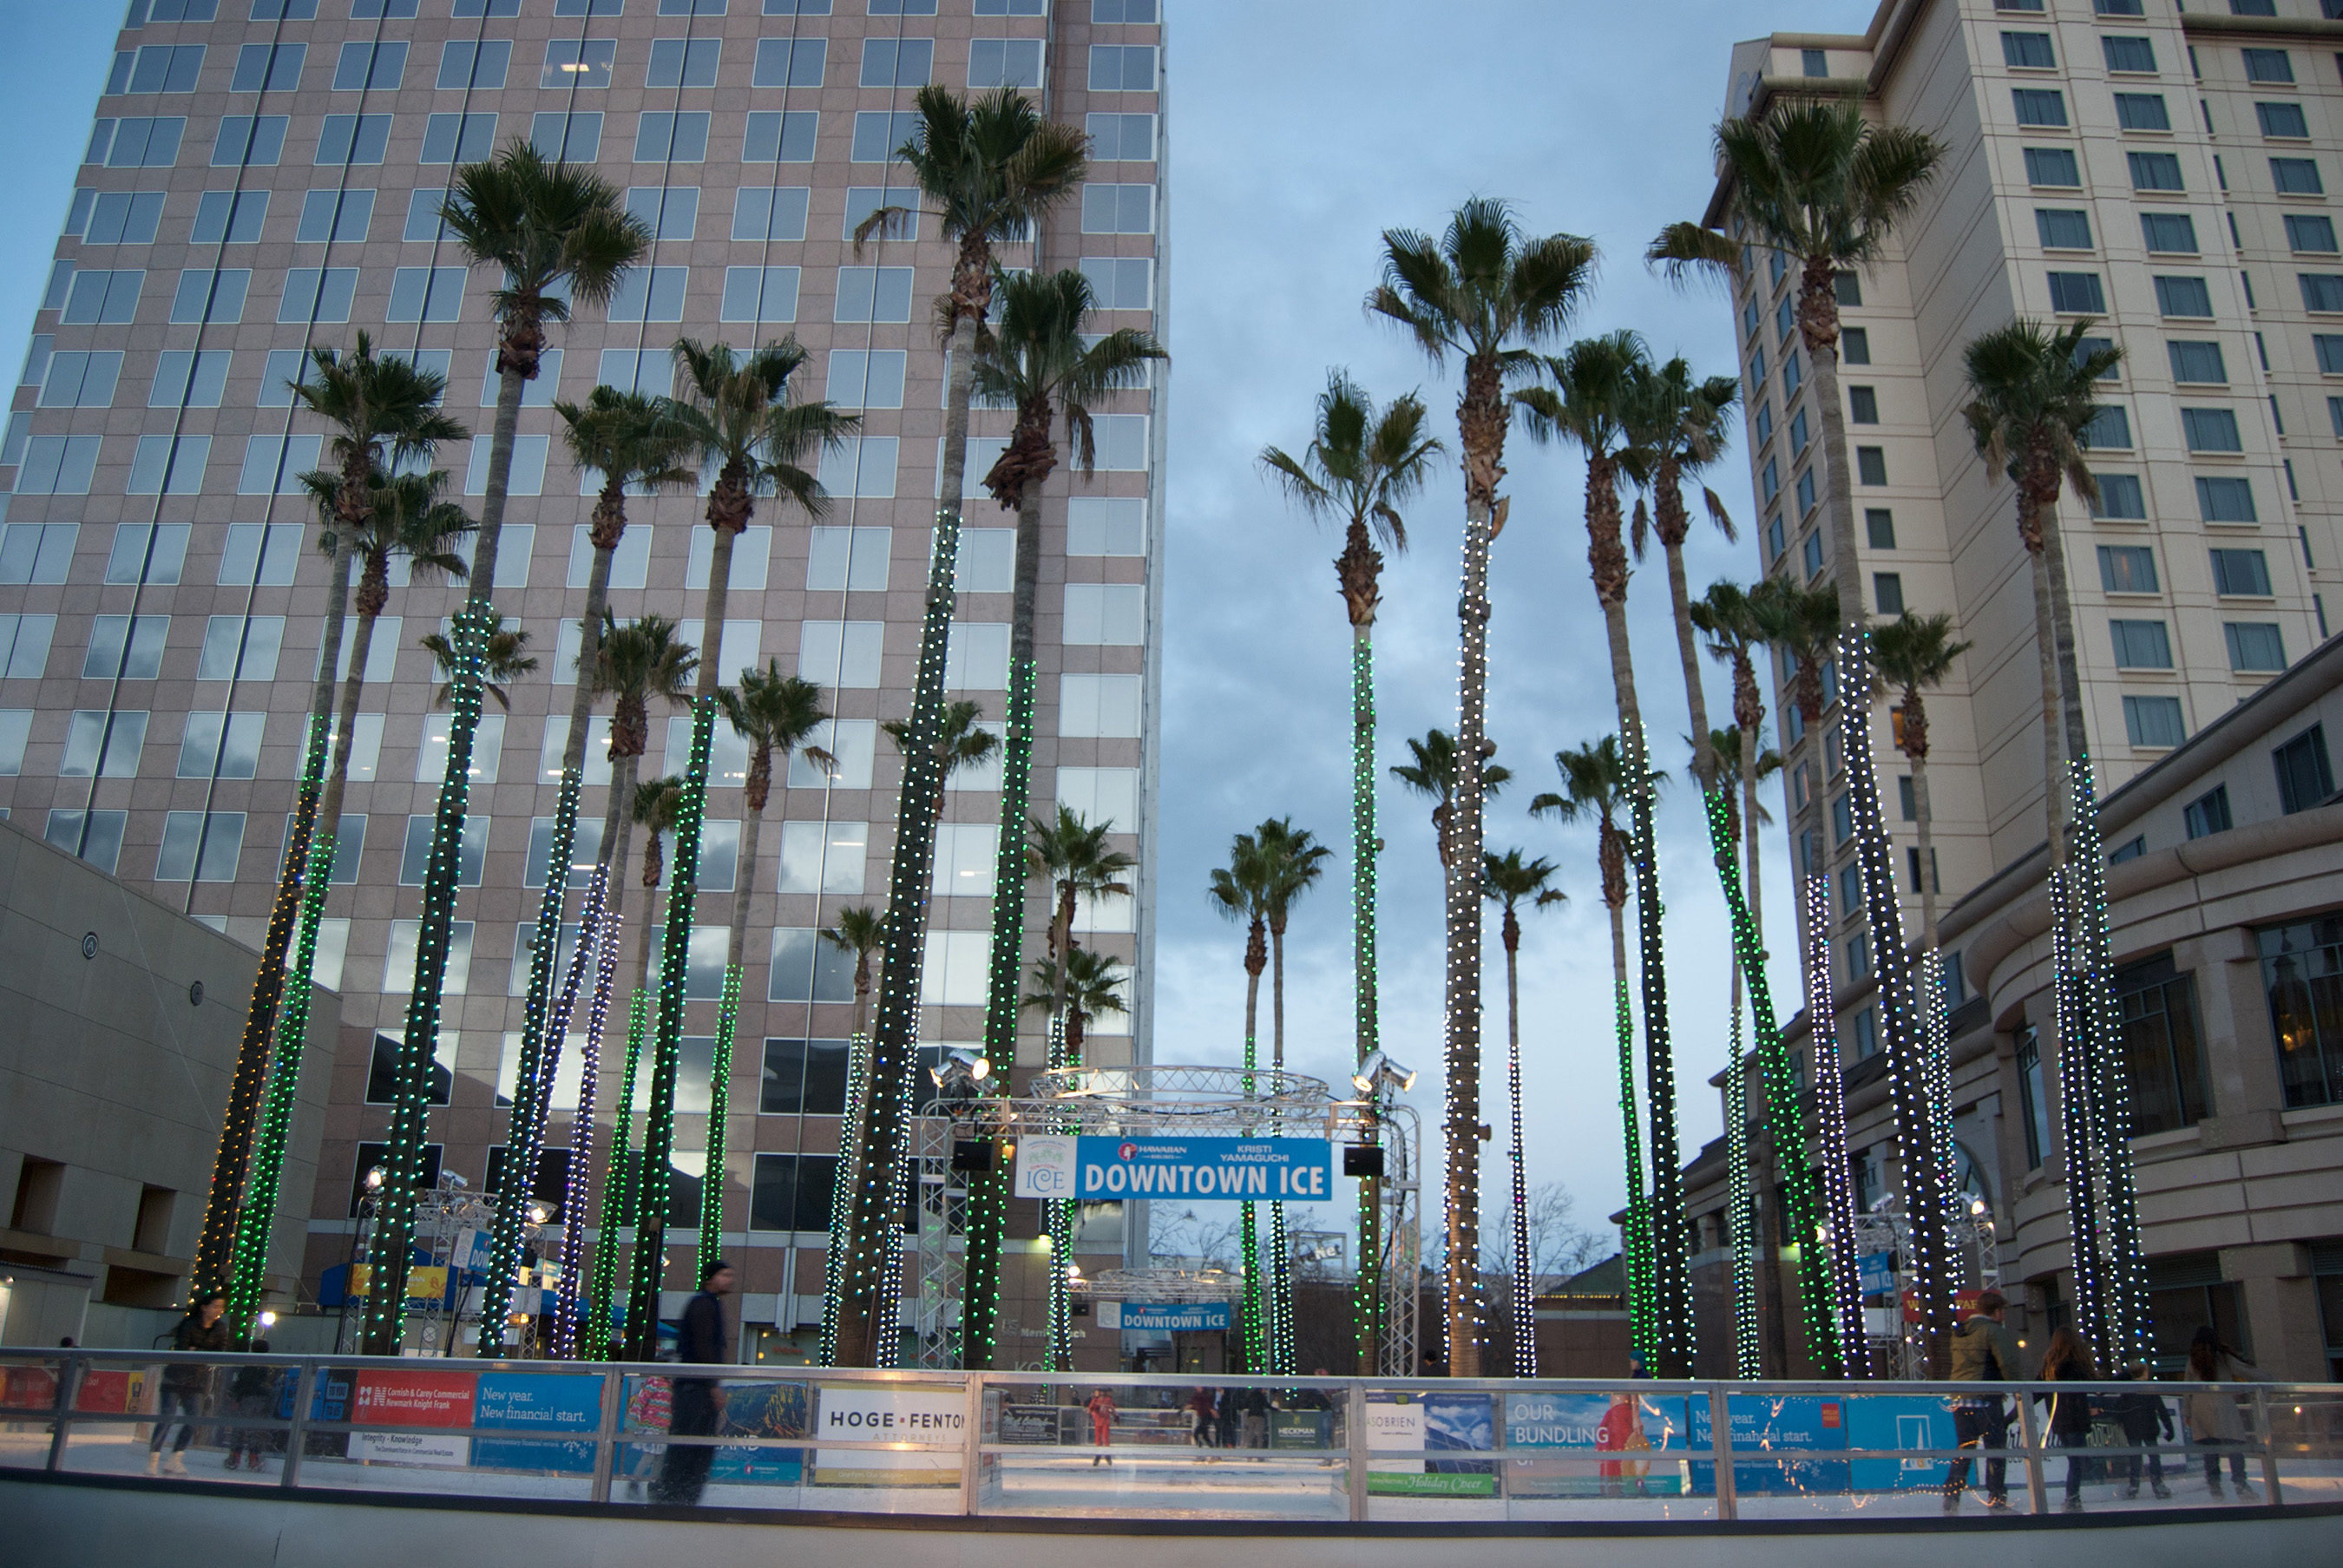 Visitors can enjoy ice skating under palm trees and dancing lights throughout Game Week.